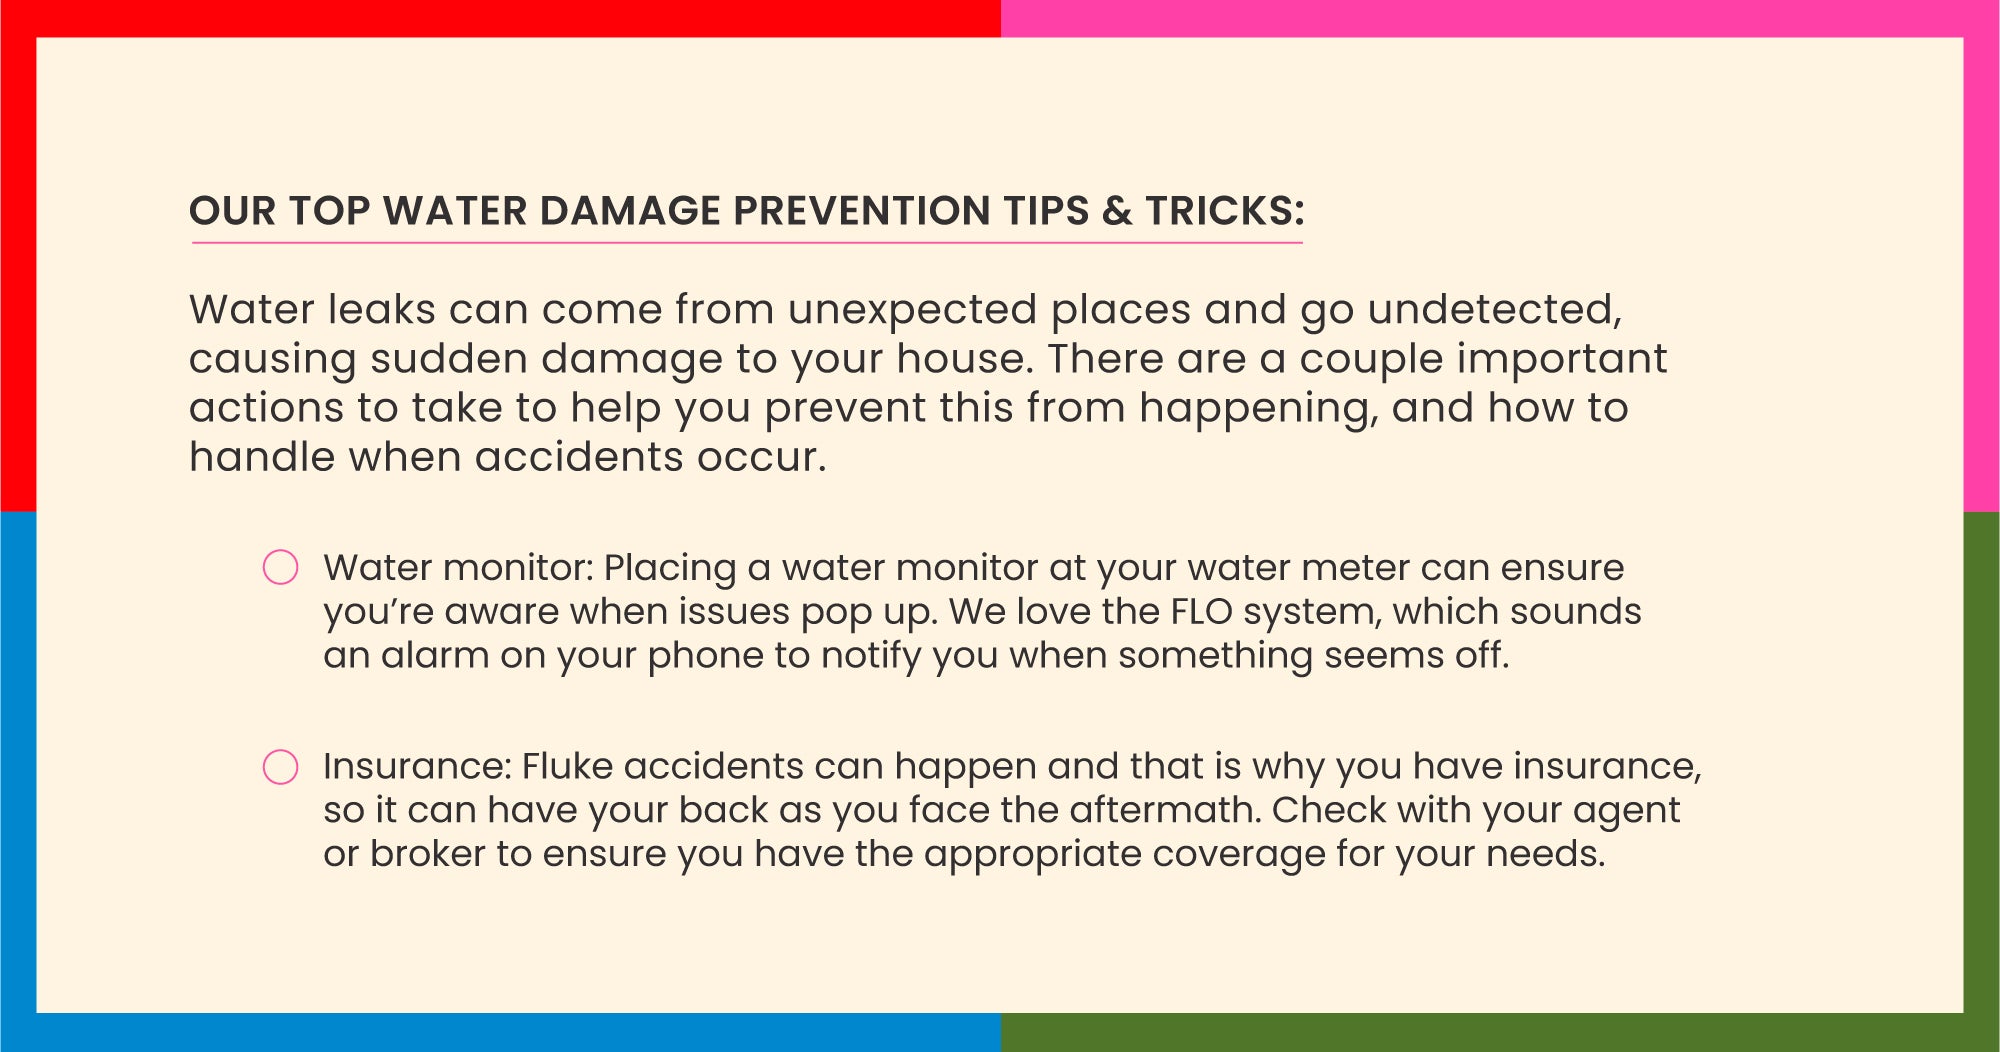 Our Top Water Damage Prevention Tips